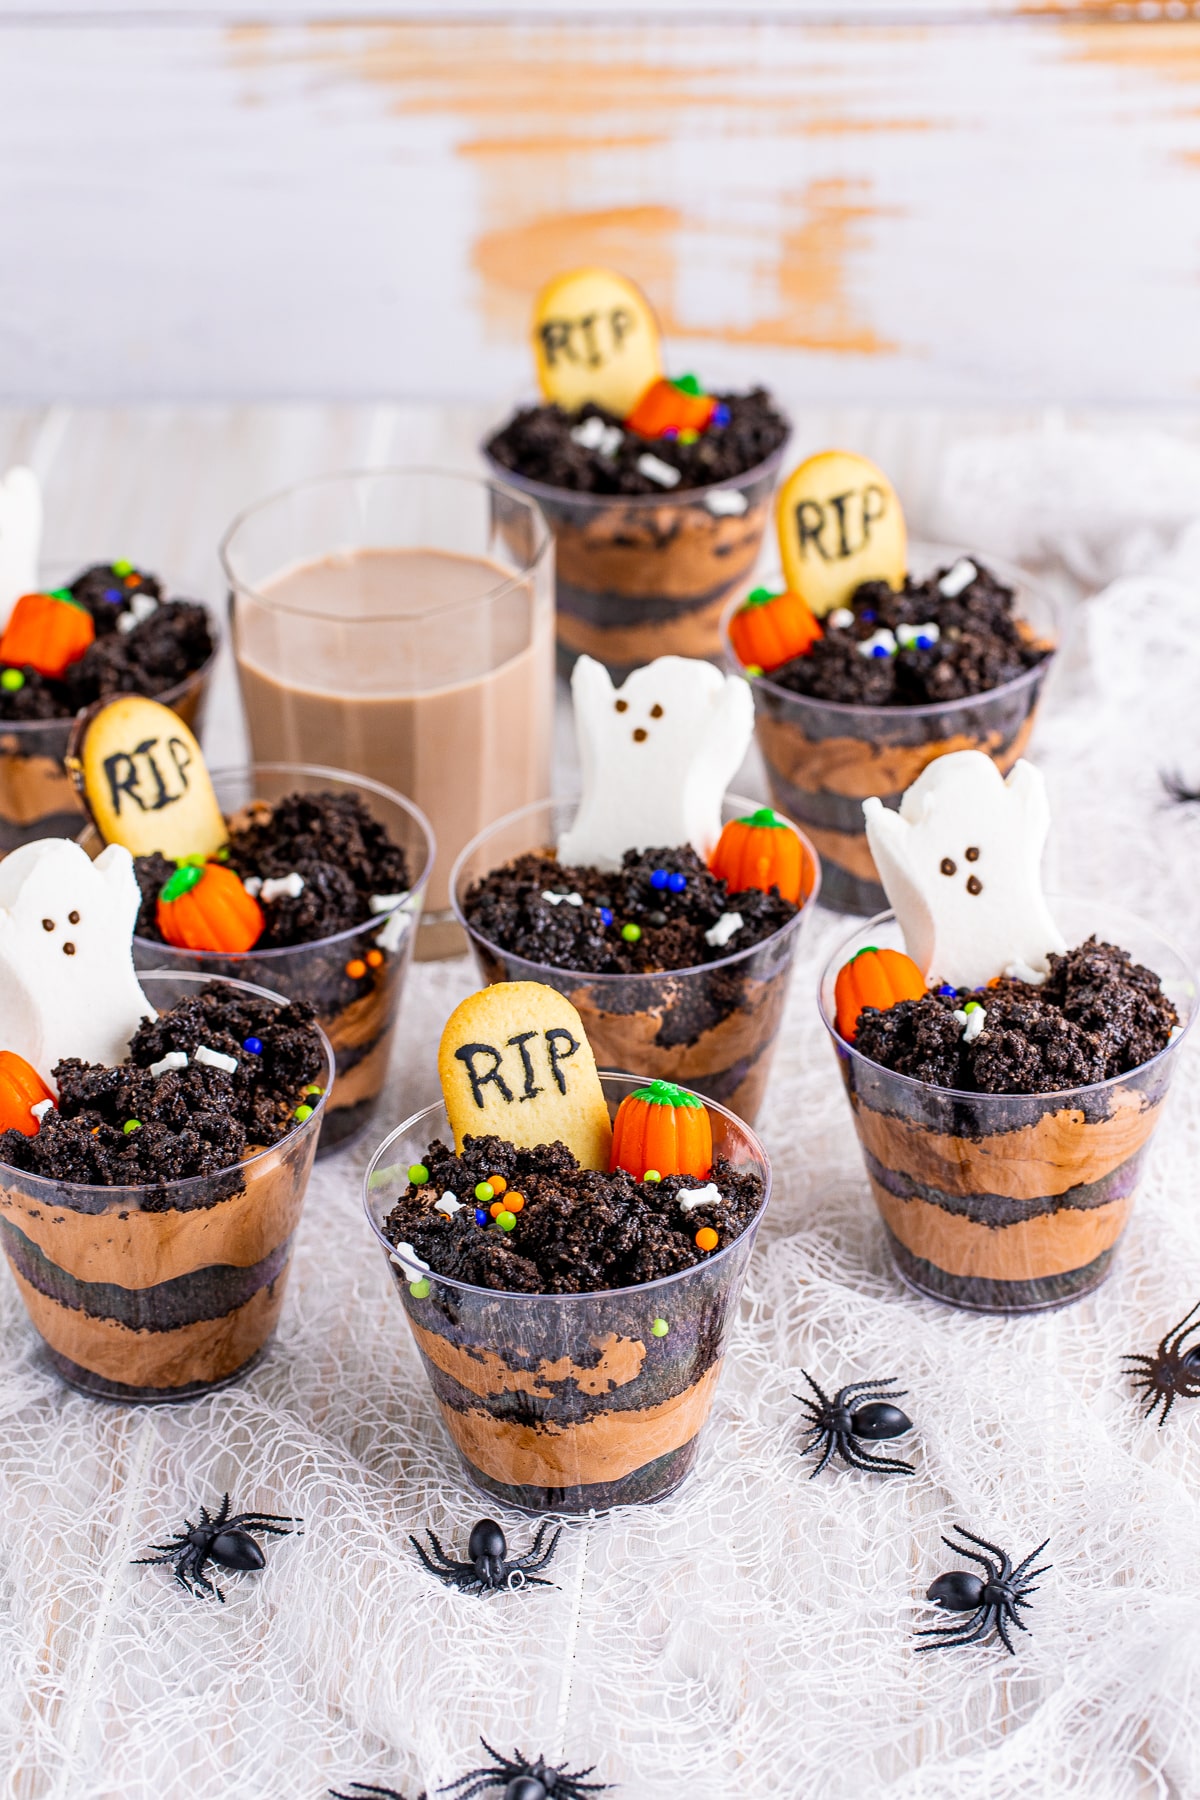 Dirt Cups spread out over a white linen with chocolate milk in background.